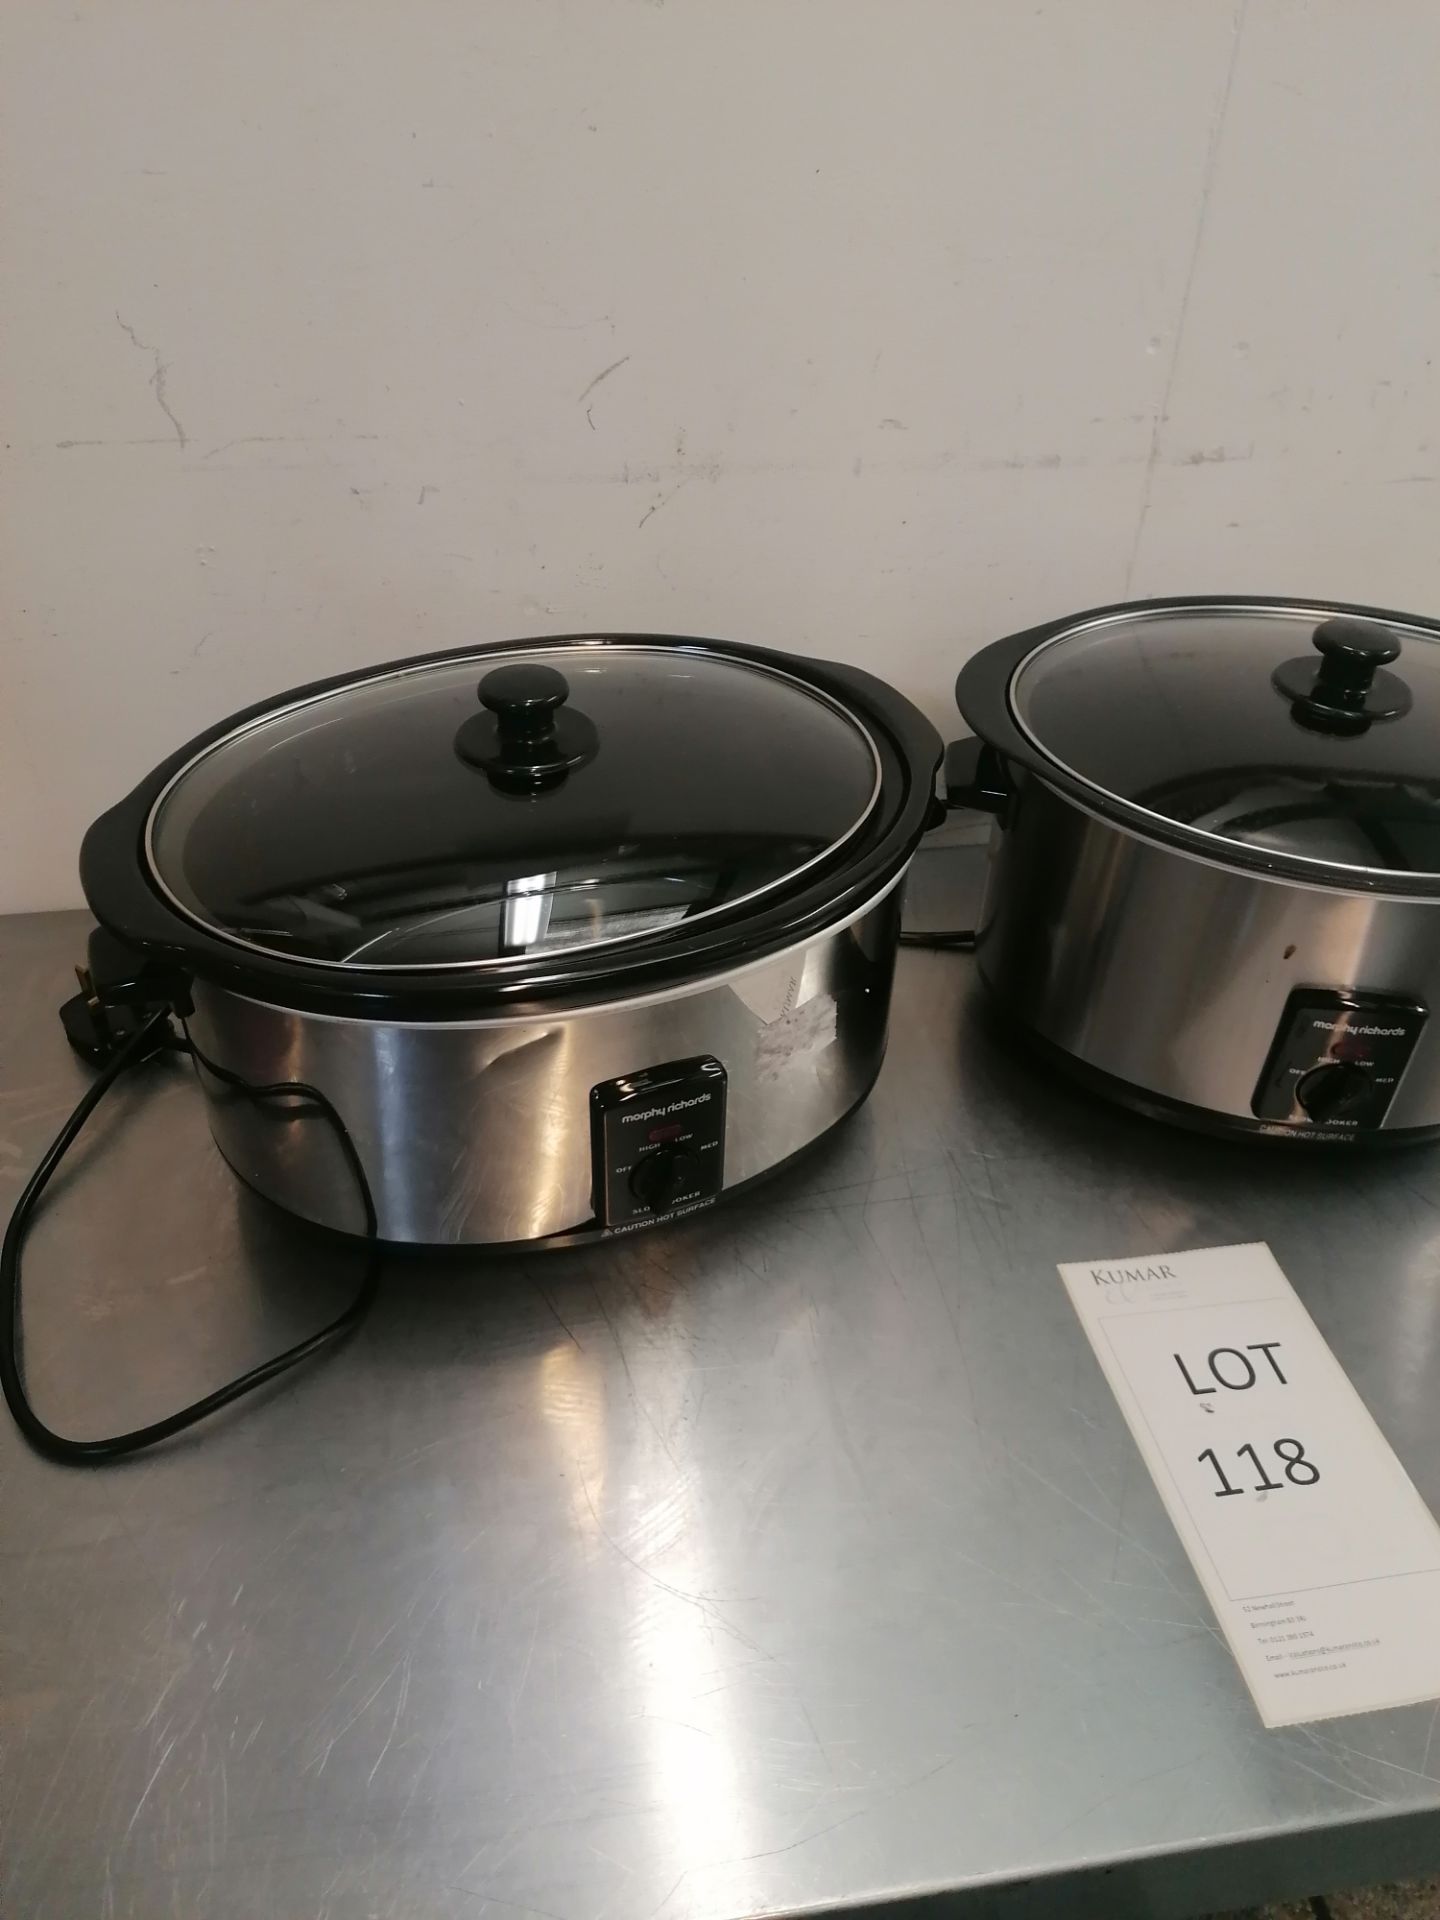 2 x Morphy richards 48705 slow cooker - Image 2 of 4